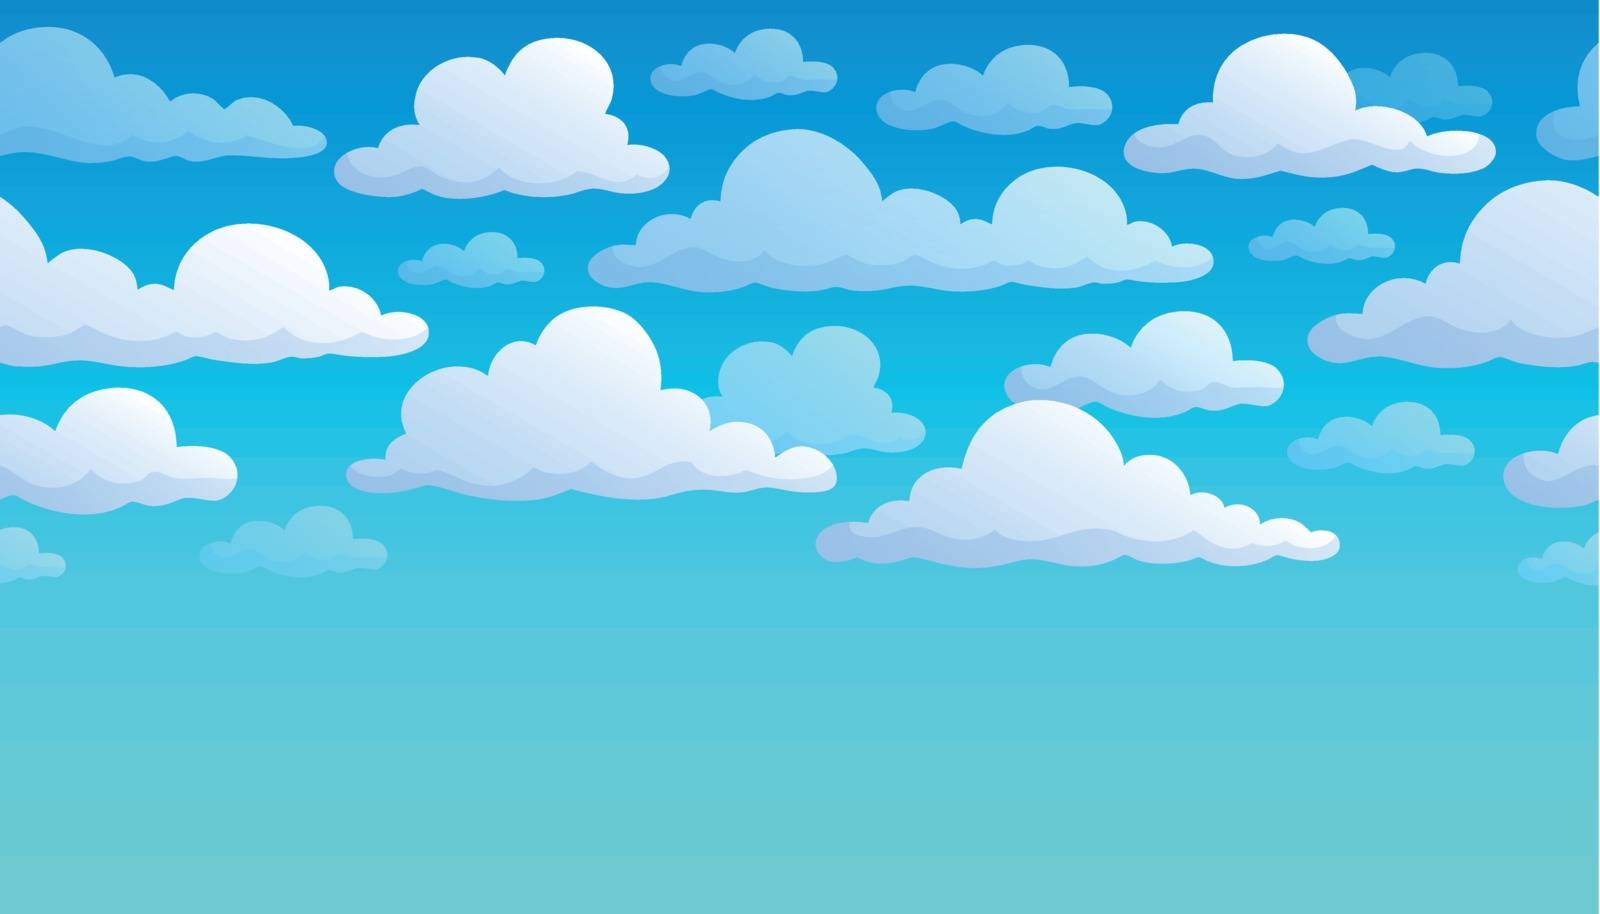 Cloudy sky background 7 - eps10 vector illustration.